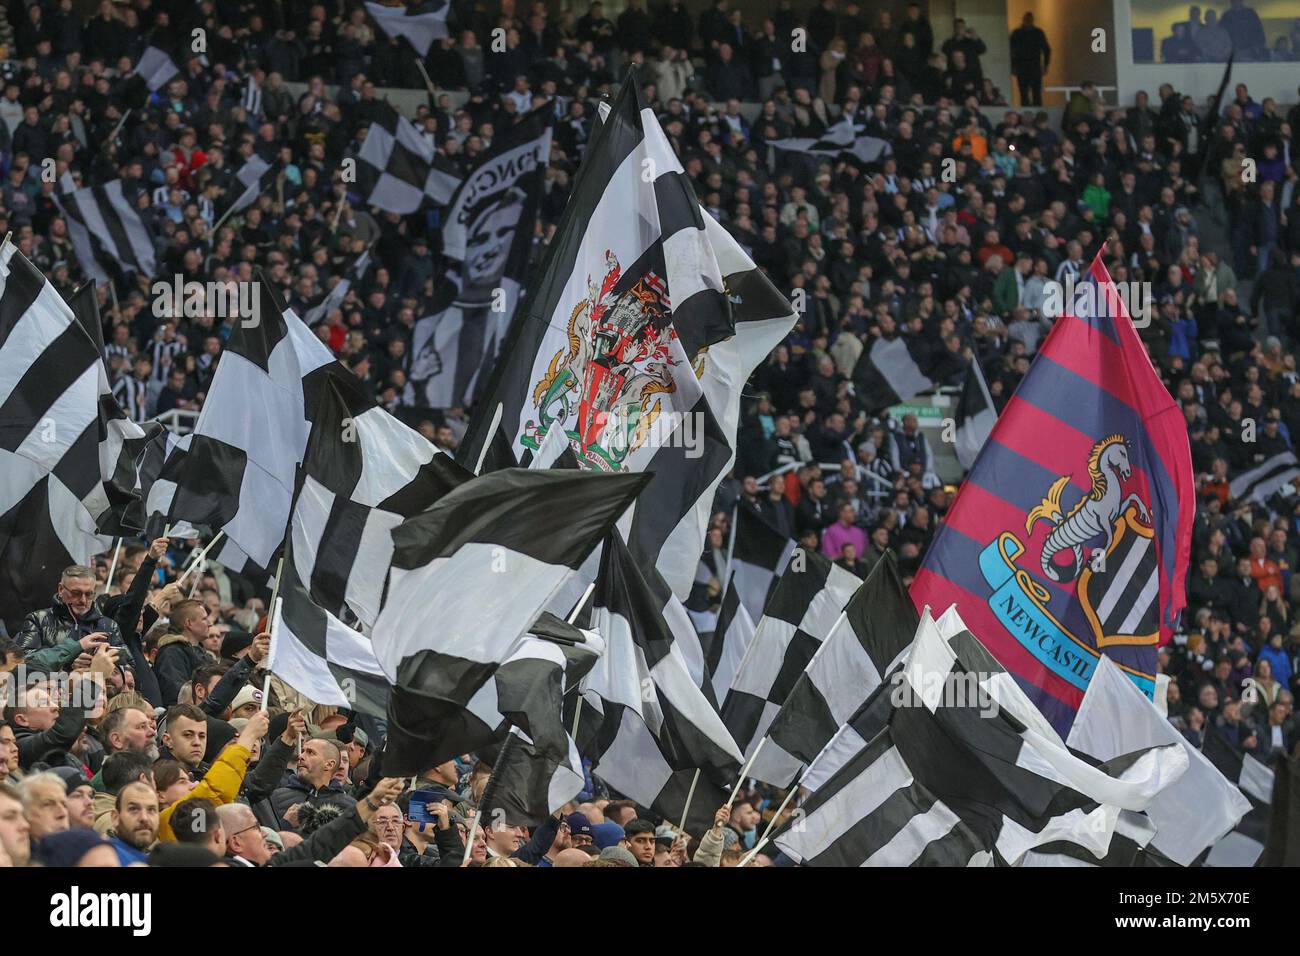 Newcastle United fans with a tifo display ahead of the Premier League match Newcastle United vs Leeds United at St. James's Park, Newcastle, United Kingdom, 31st December 2022  (Photo by Mark Cosgrove/News Images) Stock Photo